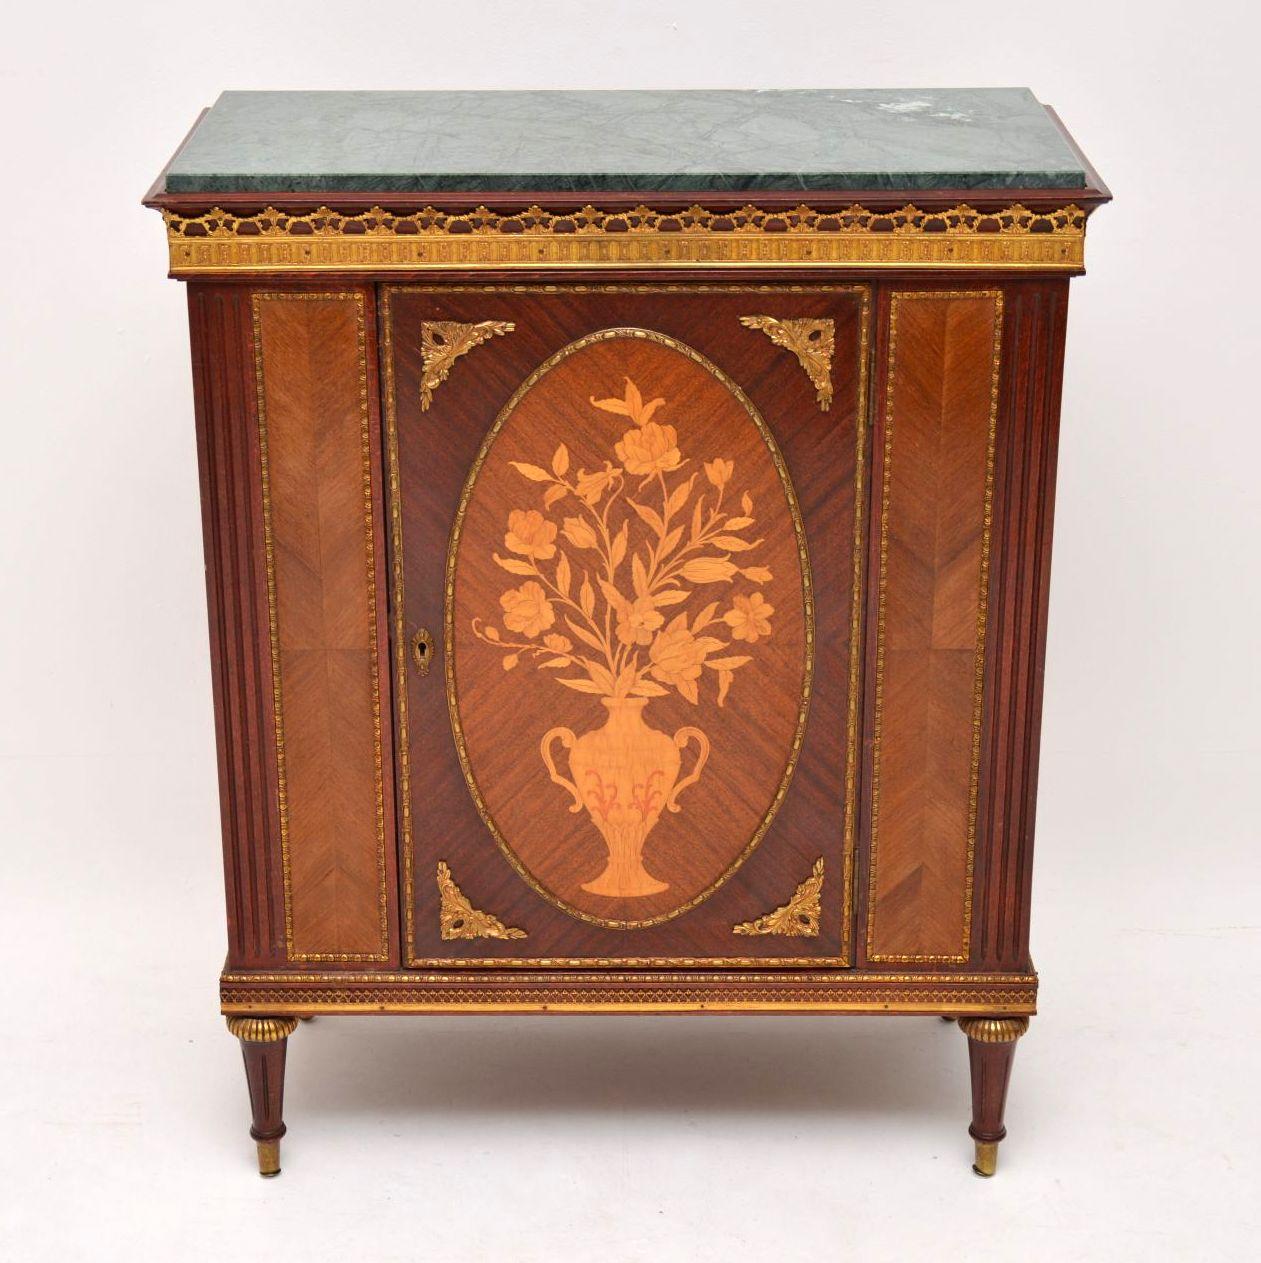 Antique French style marble top cabinet dating from circa 1930s period & with some lovely decorative features. It’s in good condition throughout including the lift off original marble top. There are gilt metal galleries top & bottom, plus lots of